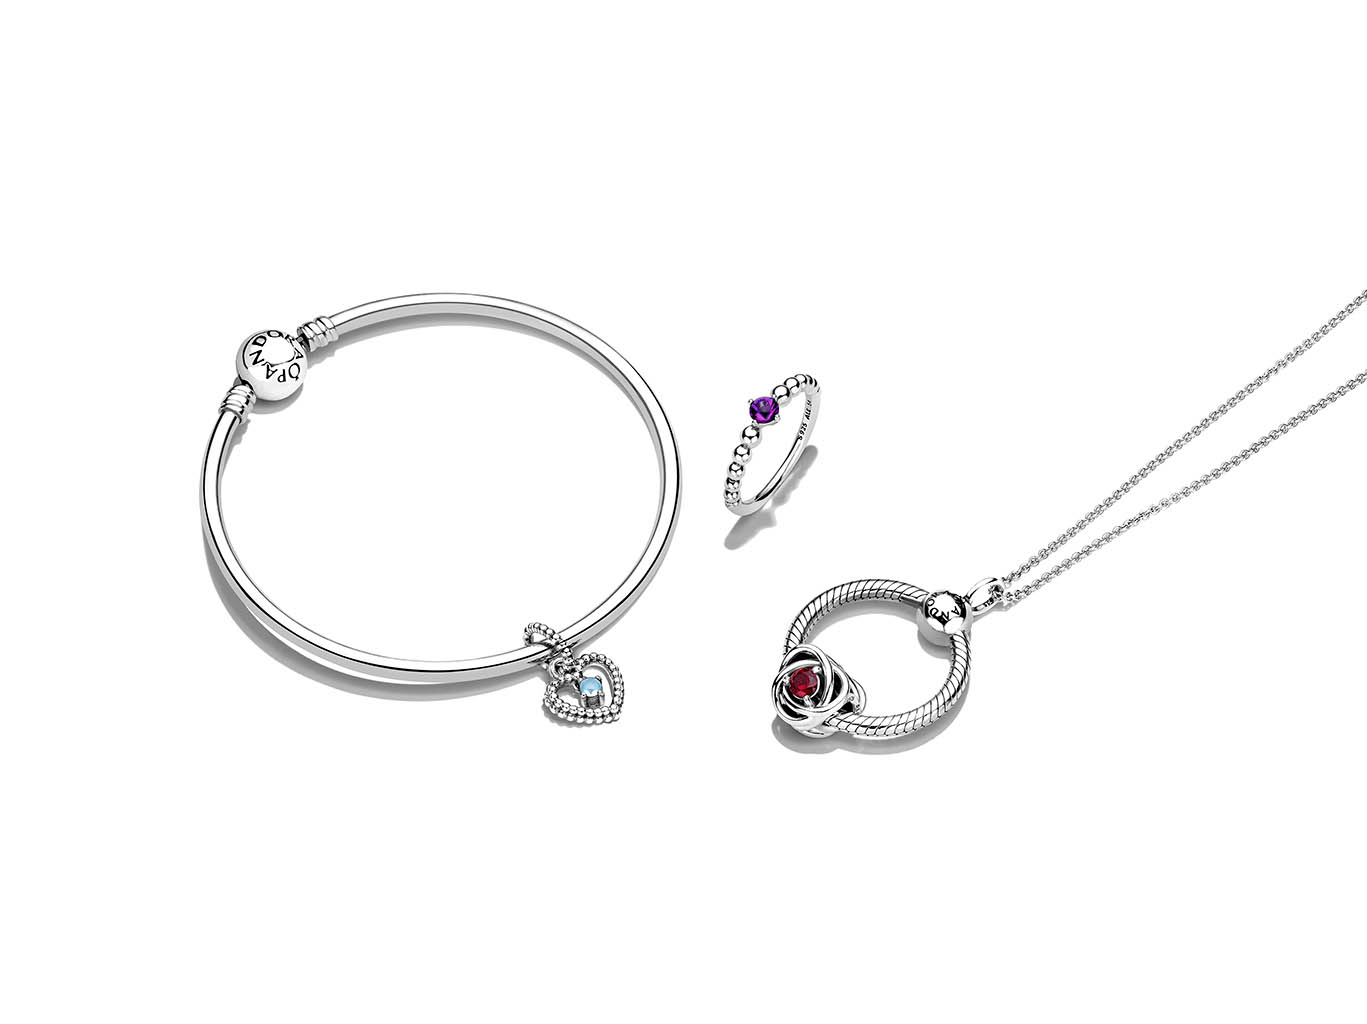 Jewellery Photography of Pandora jewellery bracelet ring and necklace set by Packshot Factory